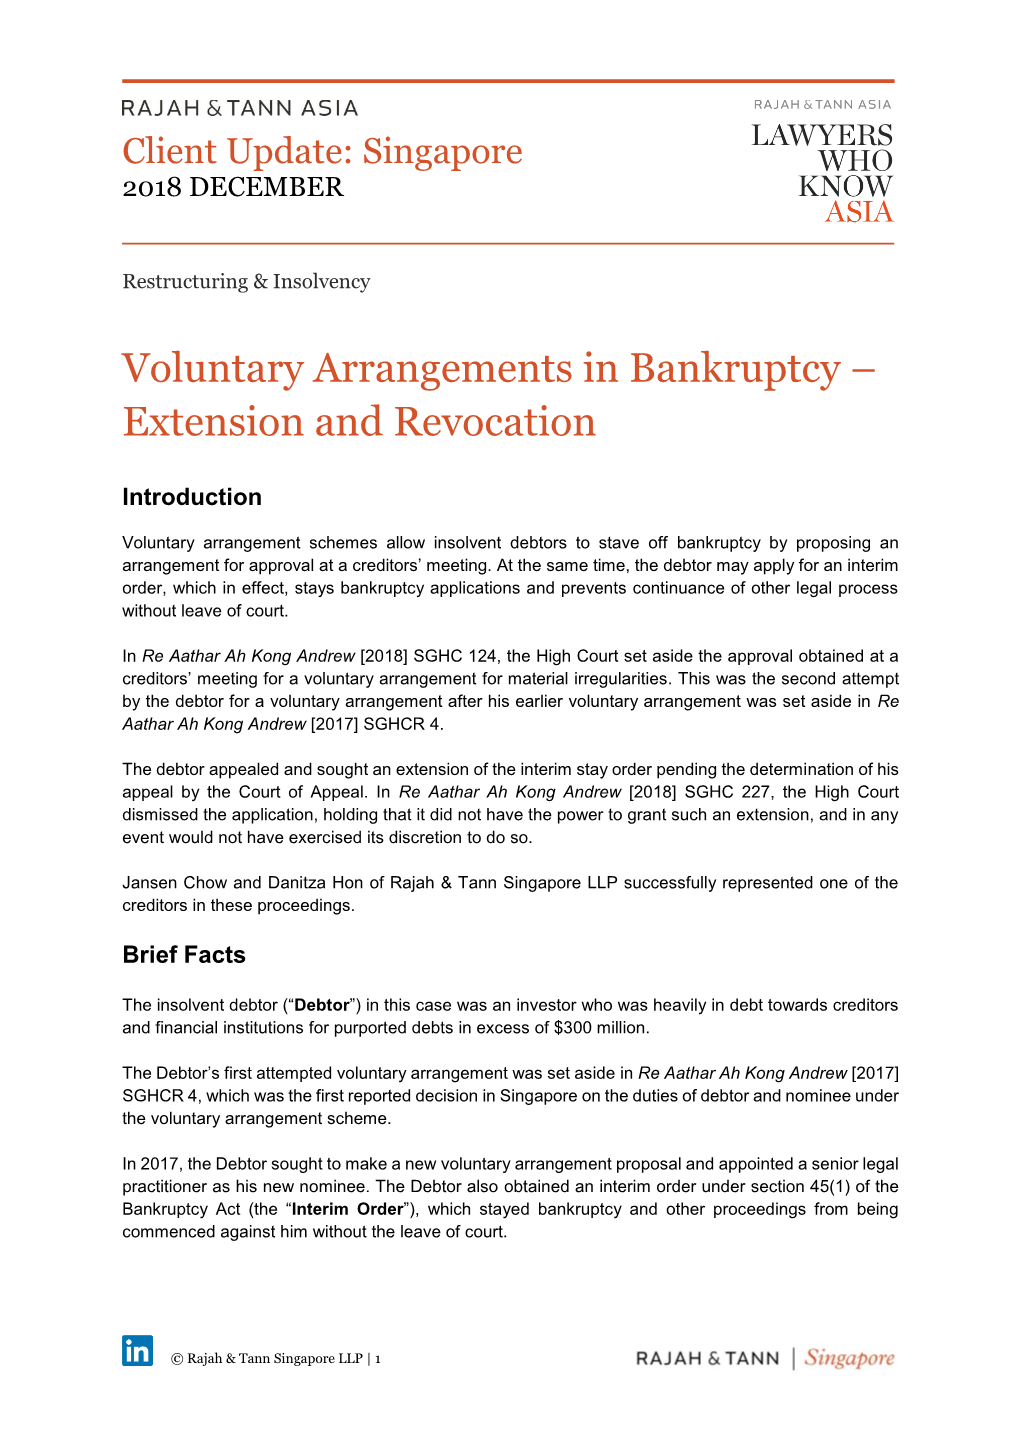 Voluntary Arrangements in Bankruptcy – Extension and Revocation